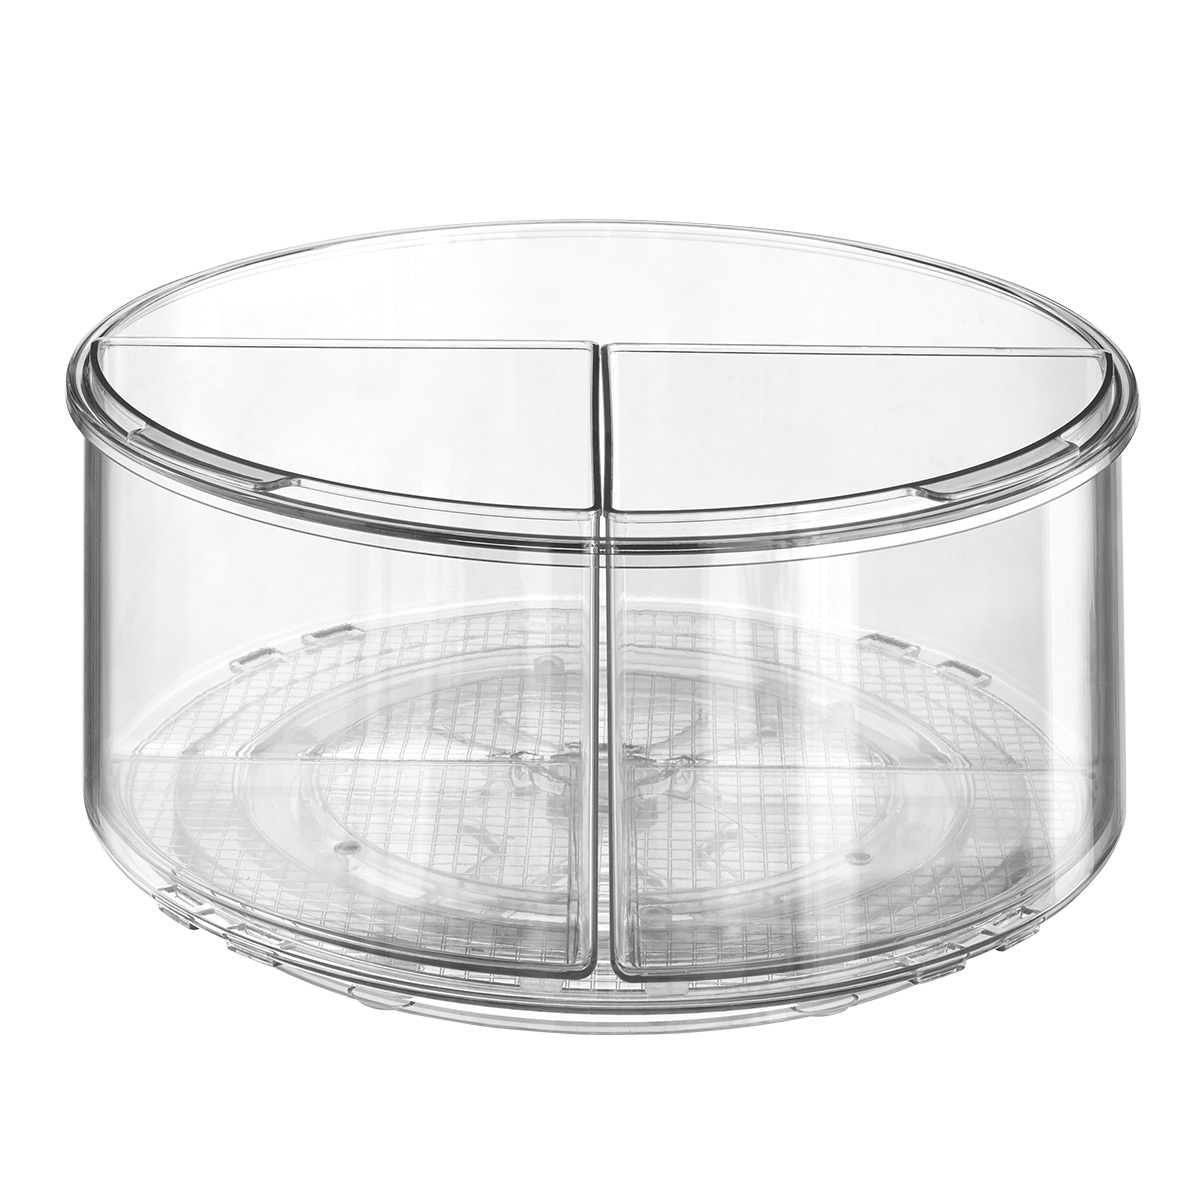 Everything Organizer Deep Turntable w/ Removable Bins Clear